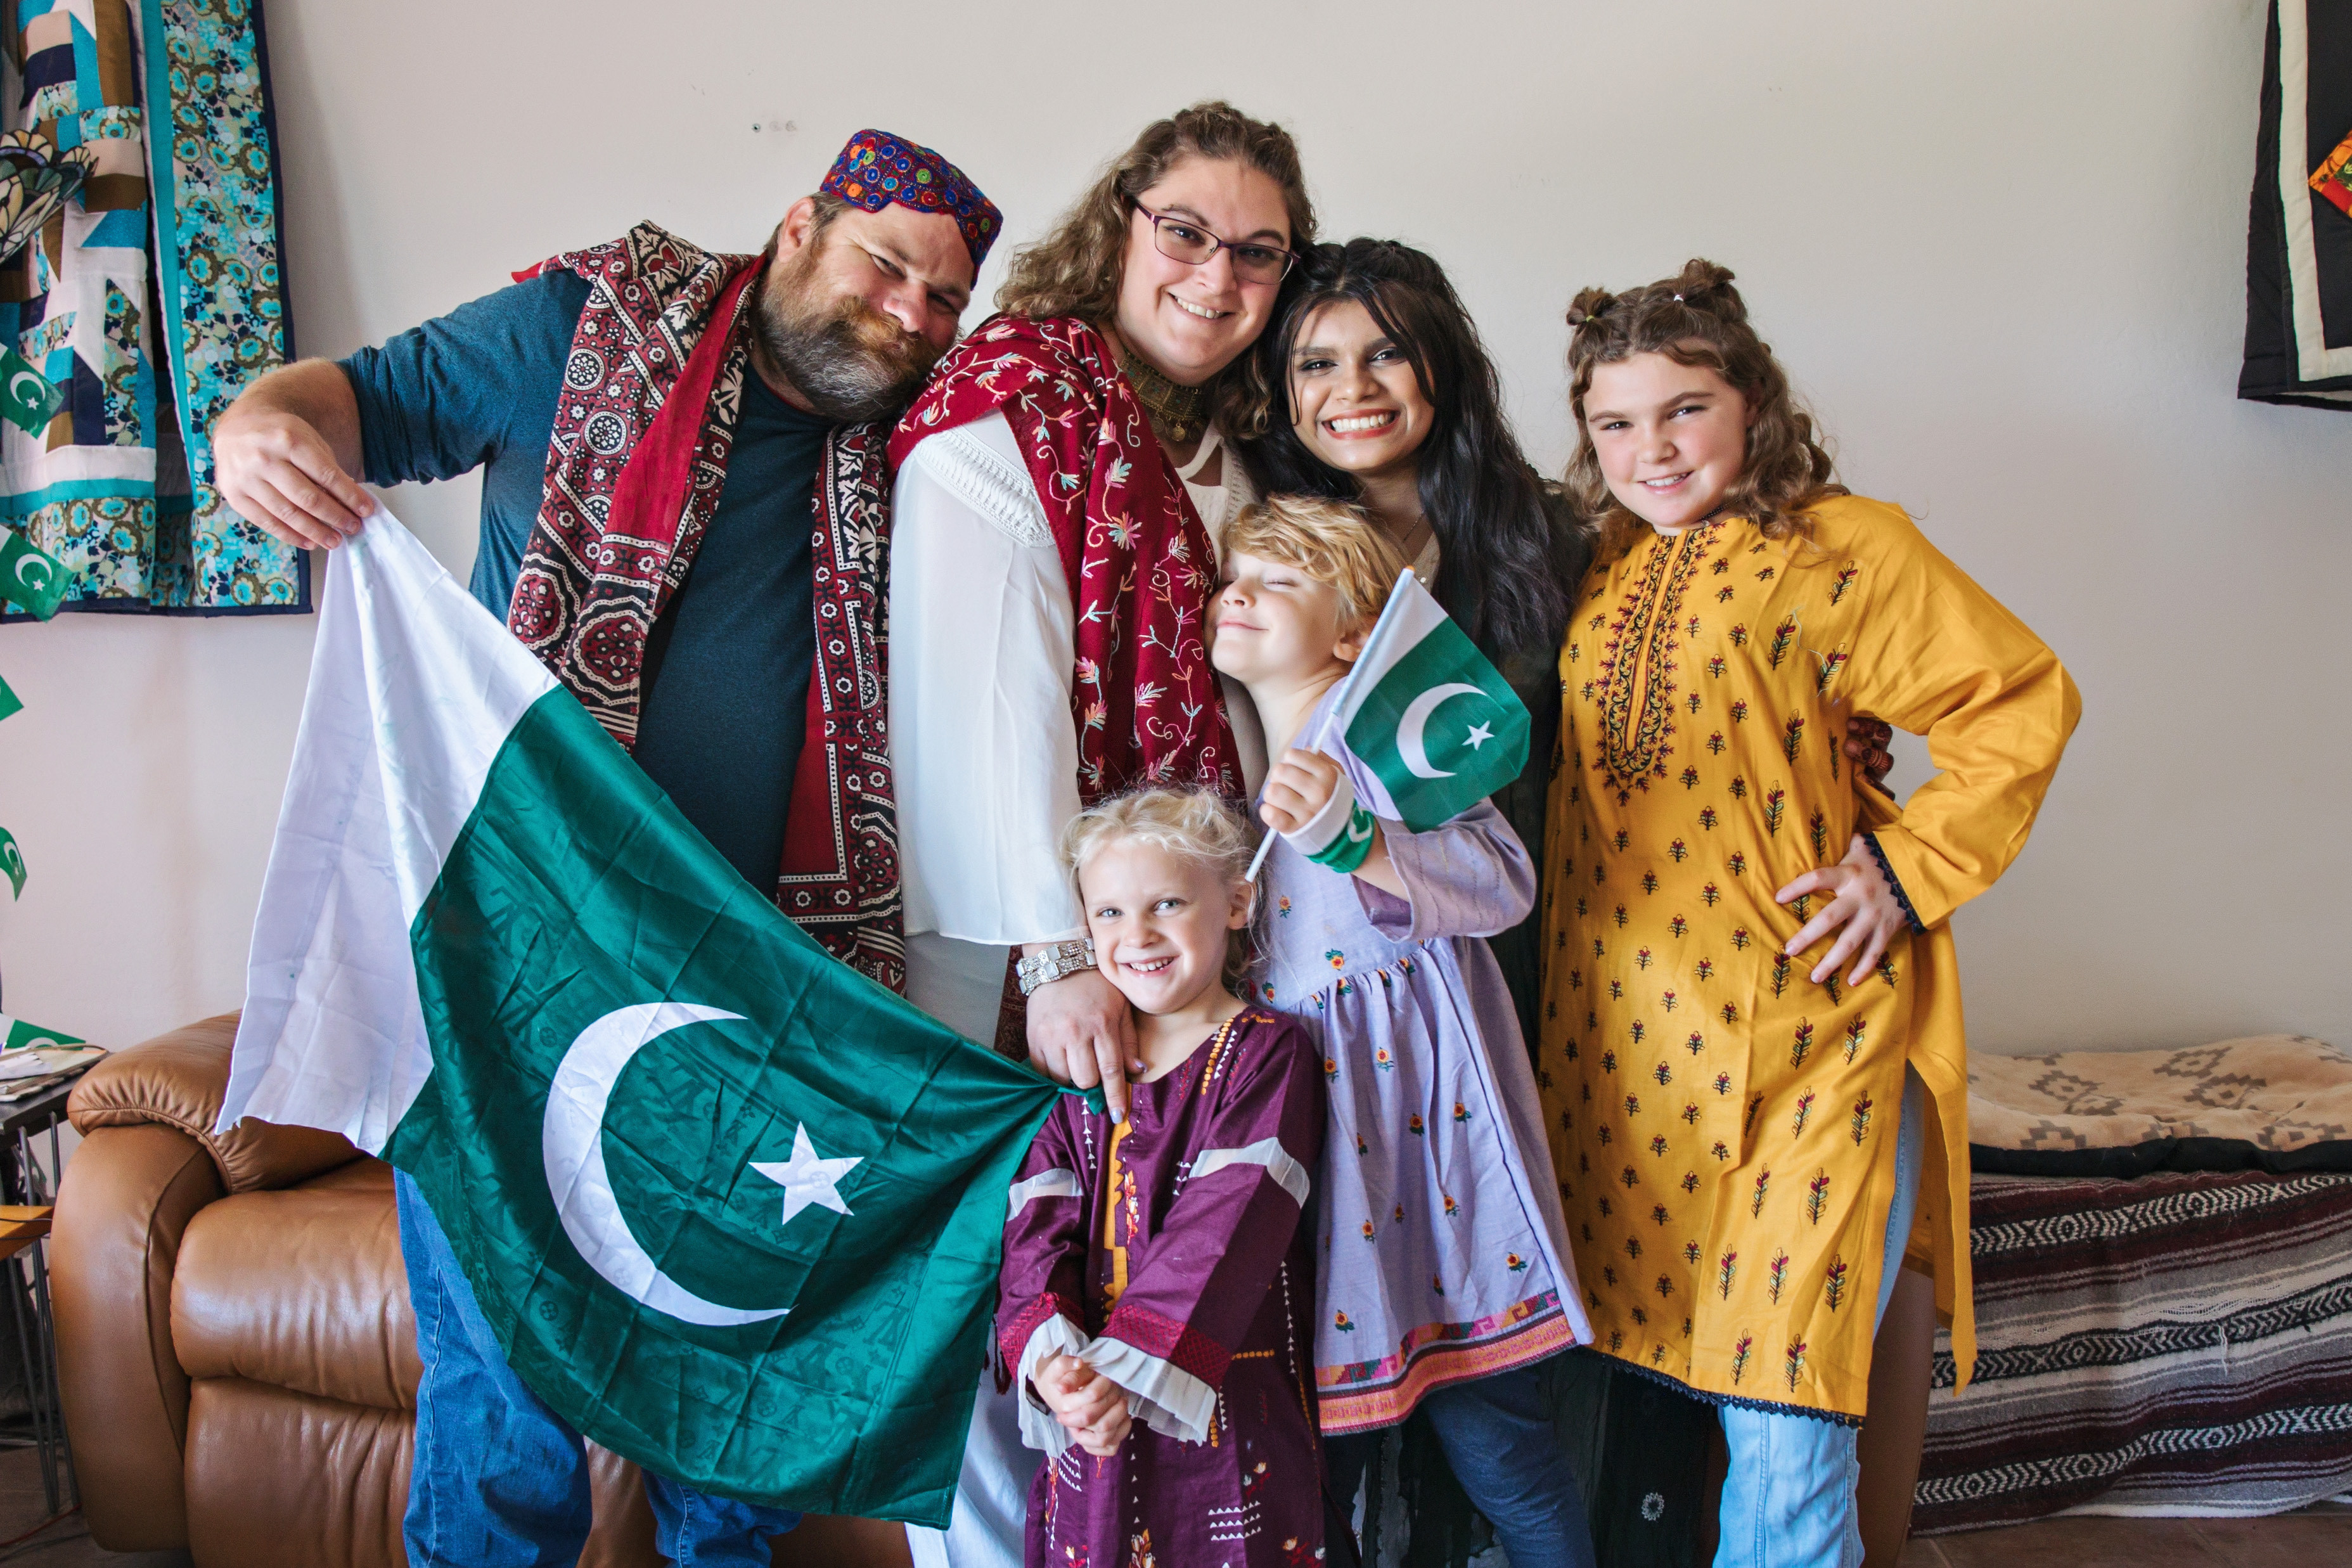 Kehkashan wither her host family holding Pakistani flags